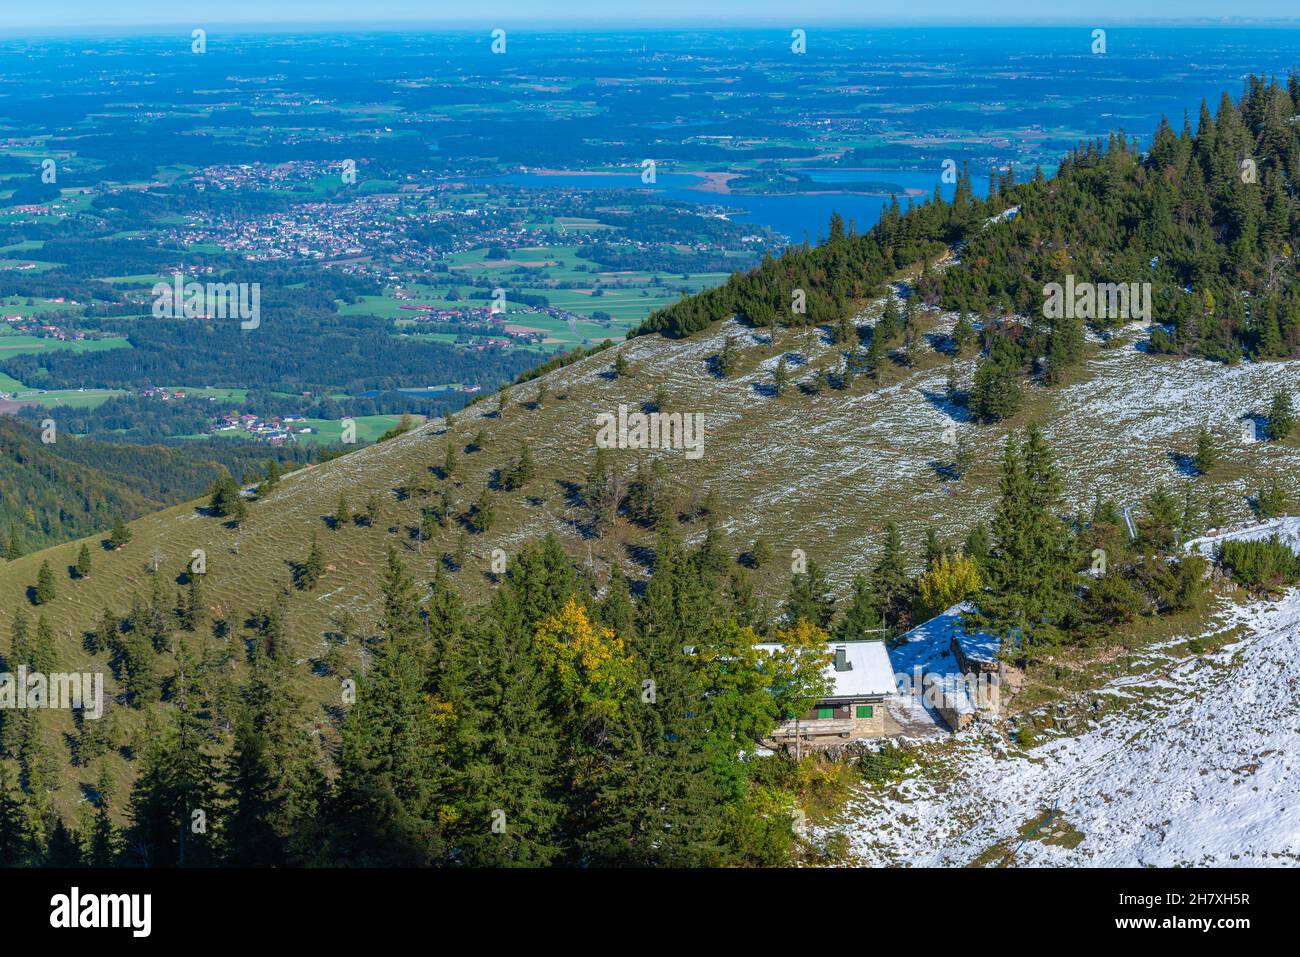 Alm hut near Kampenwand mountains at about  1500m asl with panoramic views, Aschau, Chiemgauer Alps, Upper Bavaria Southern Germany, Europe Stock Photo